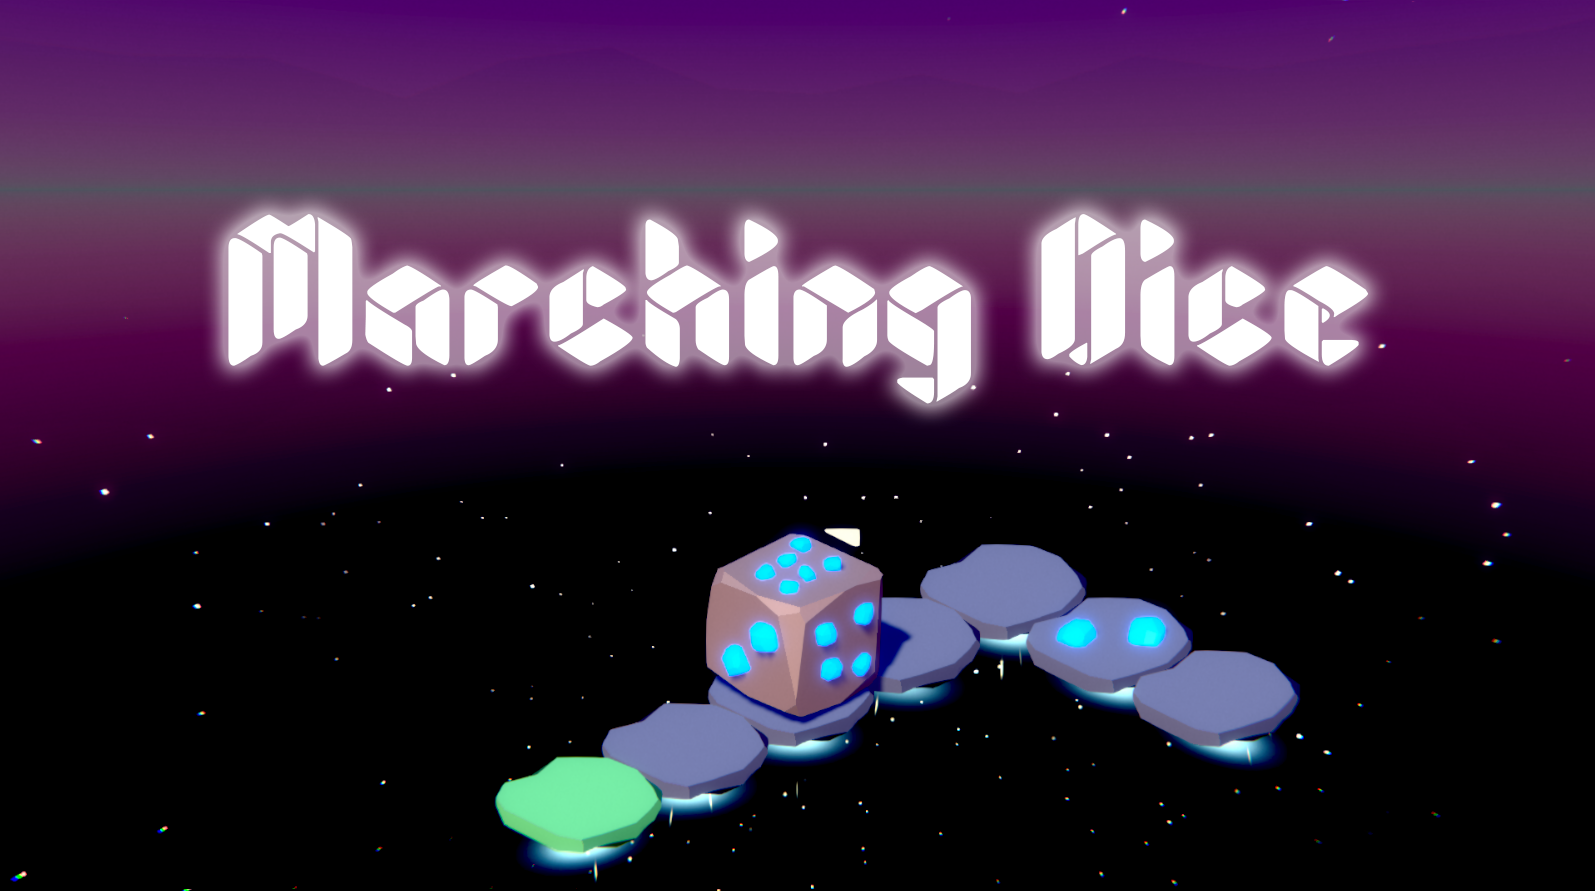 Marching Dice